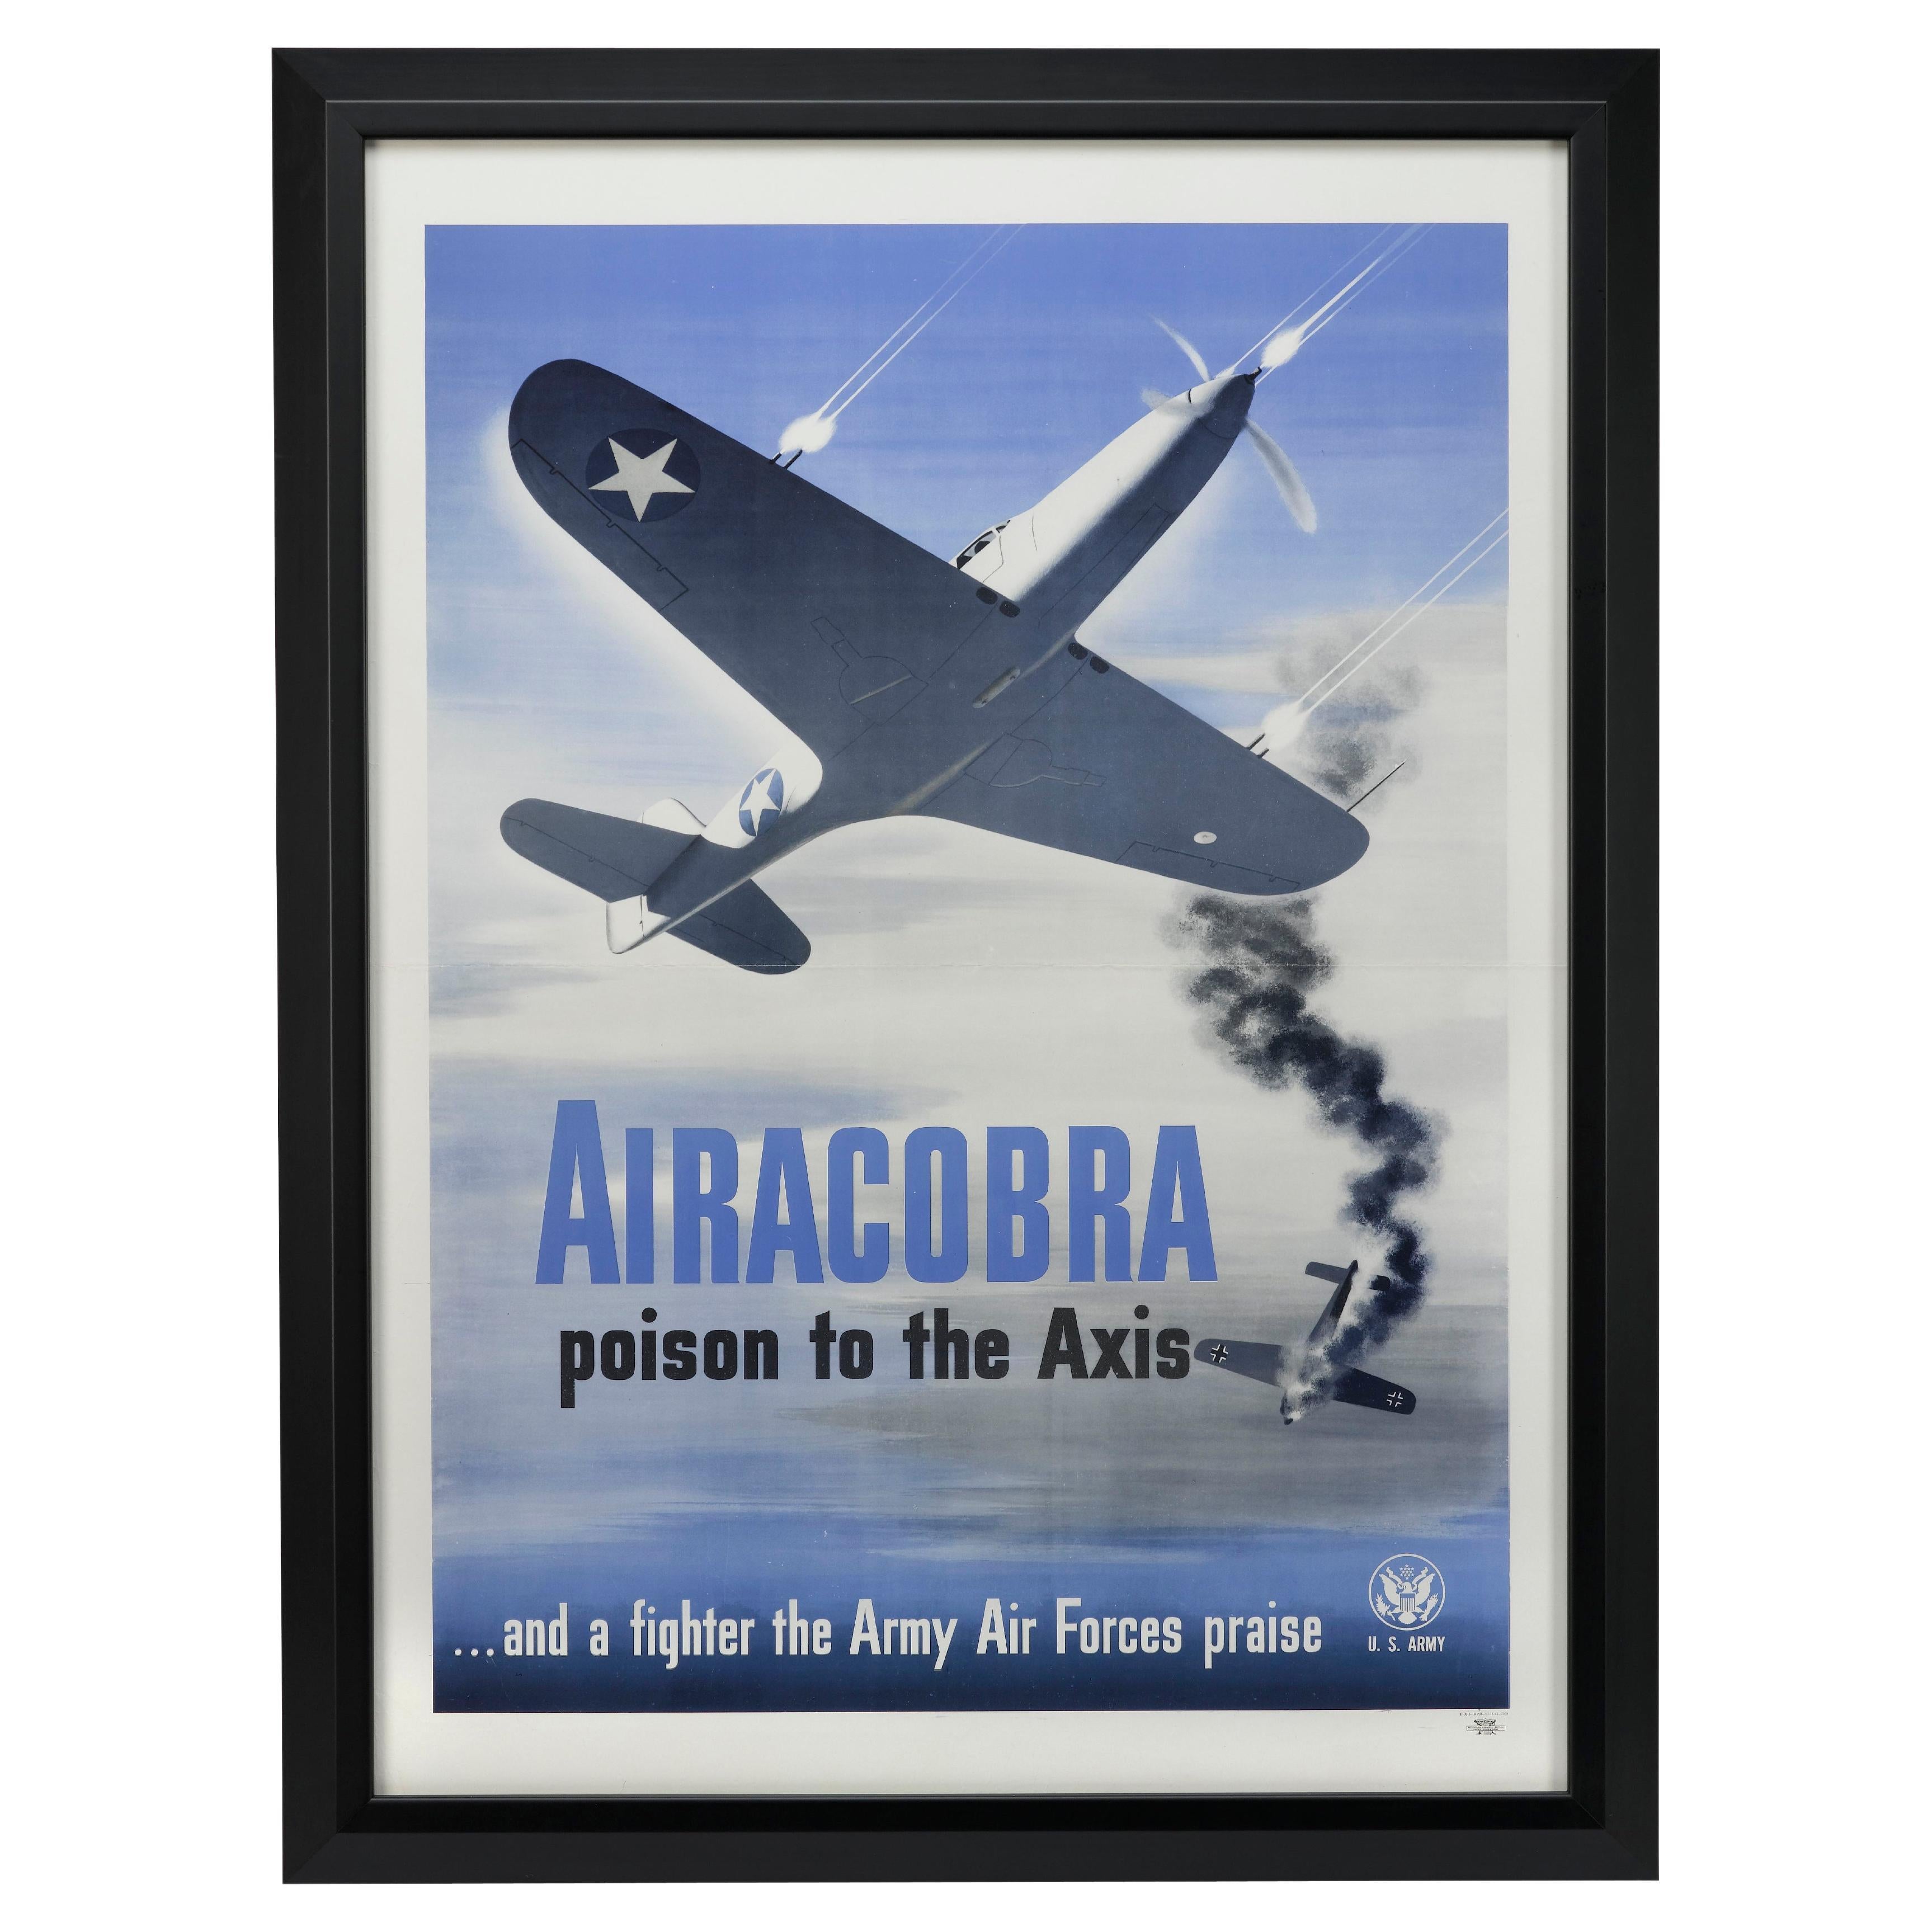 "Airacobra poison to the Axis" Vintage WWII Poster, 1943